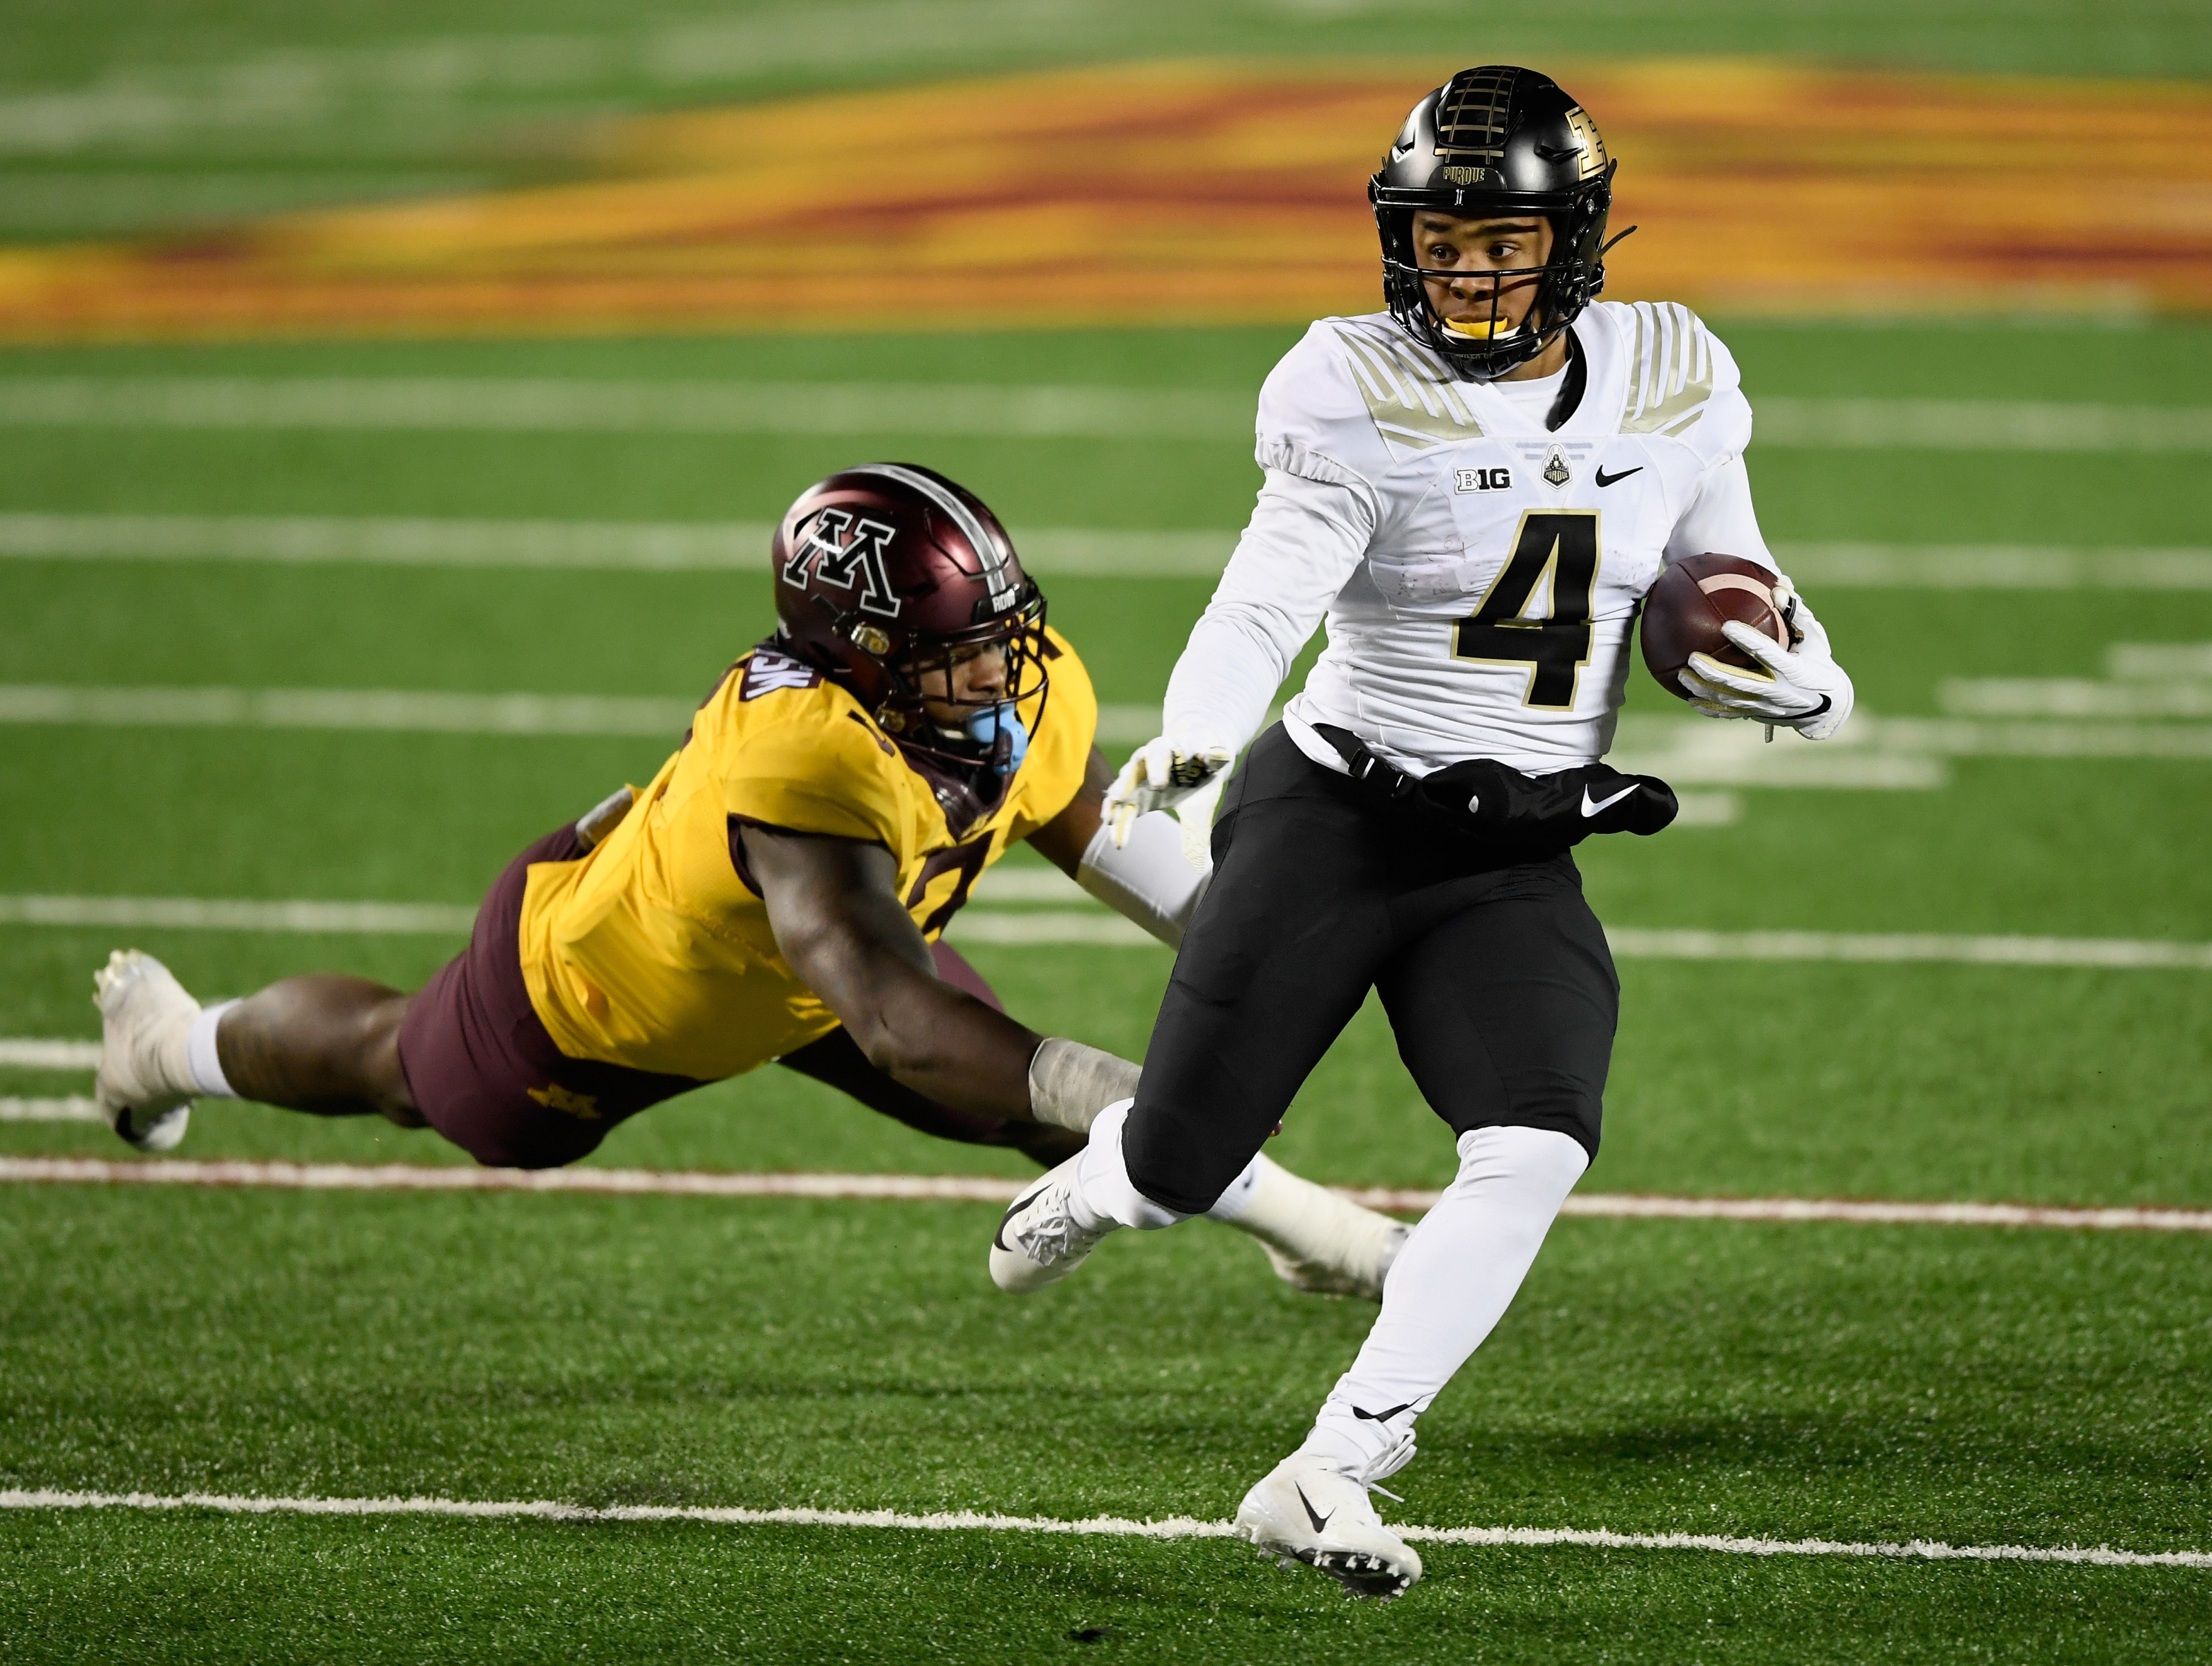 Arizona Cardinals: Rondale Moore brings explosive upside to offense